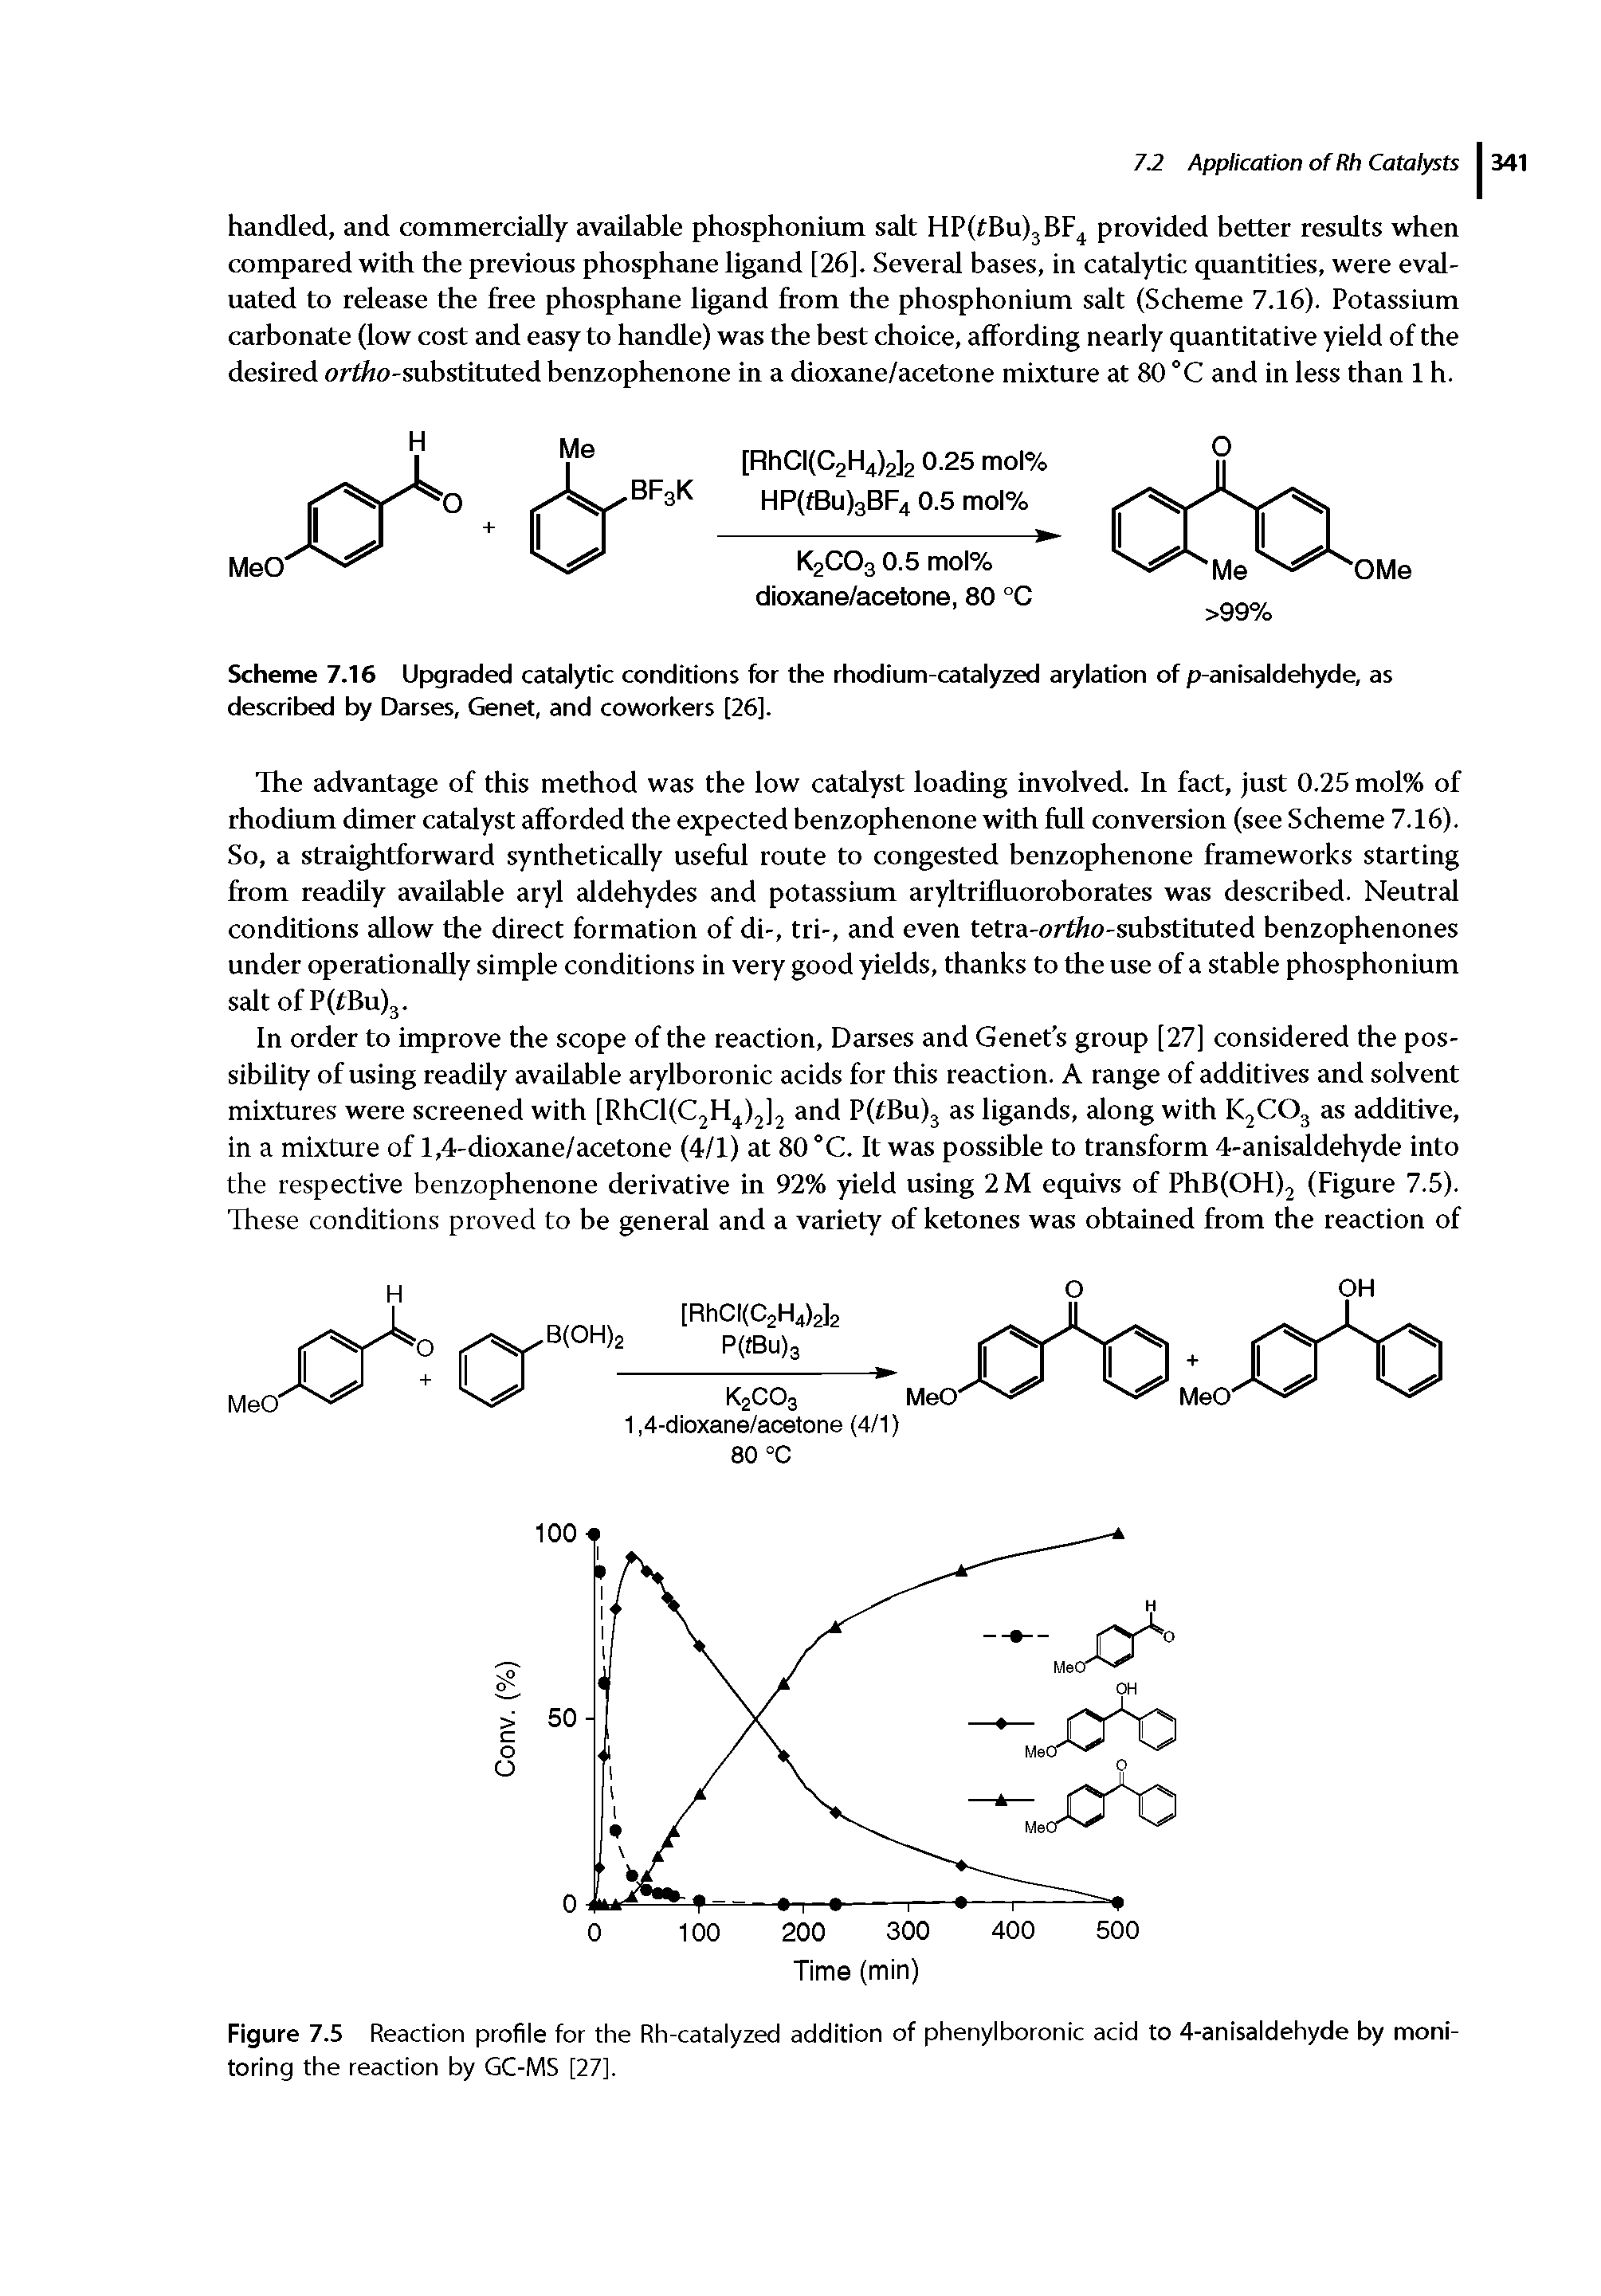 Scheme 7.16 Upgraded catalytic conditions for the rhodium-catalyzed arylation of p-anisaldehyde, as described by Darses, Genet, and coworkers [26].